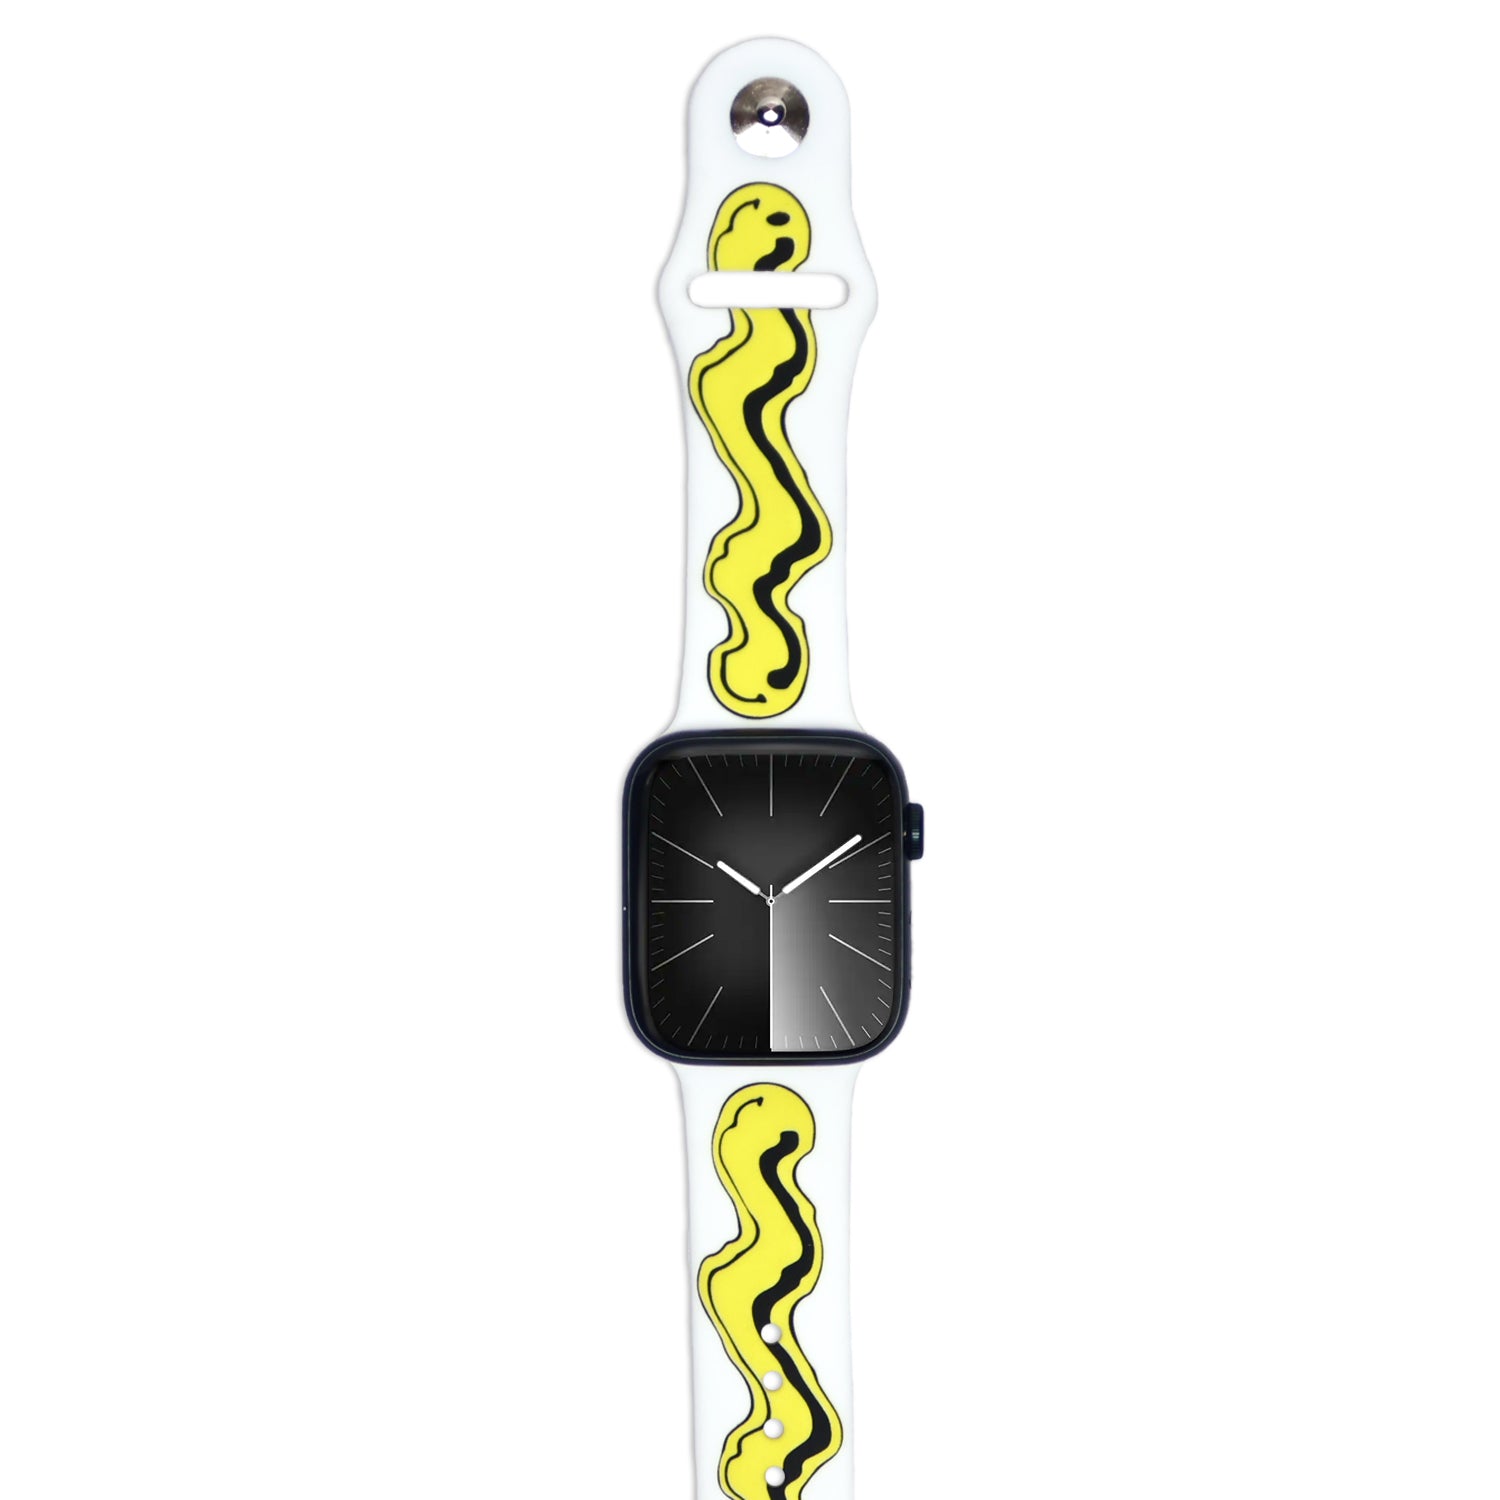 Have Fun Apple Watch Band - Projects Watches